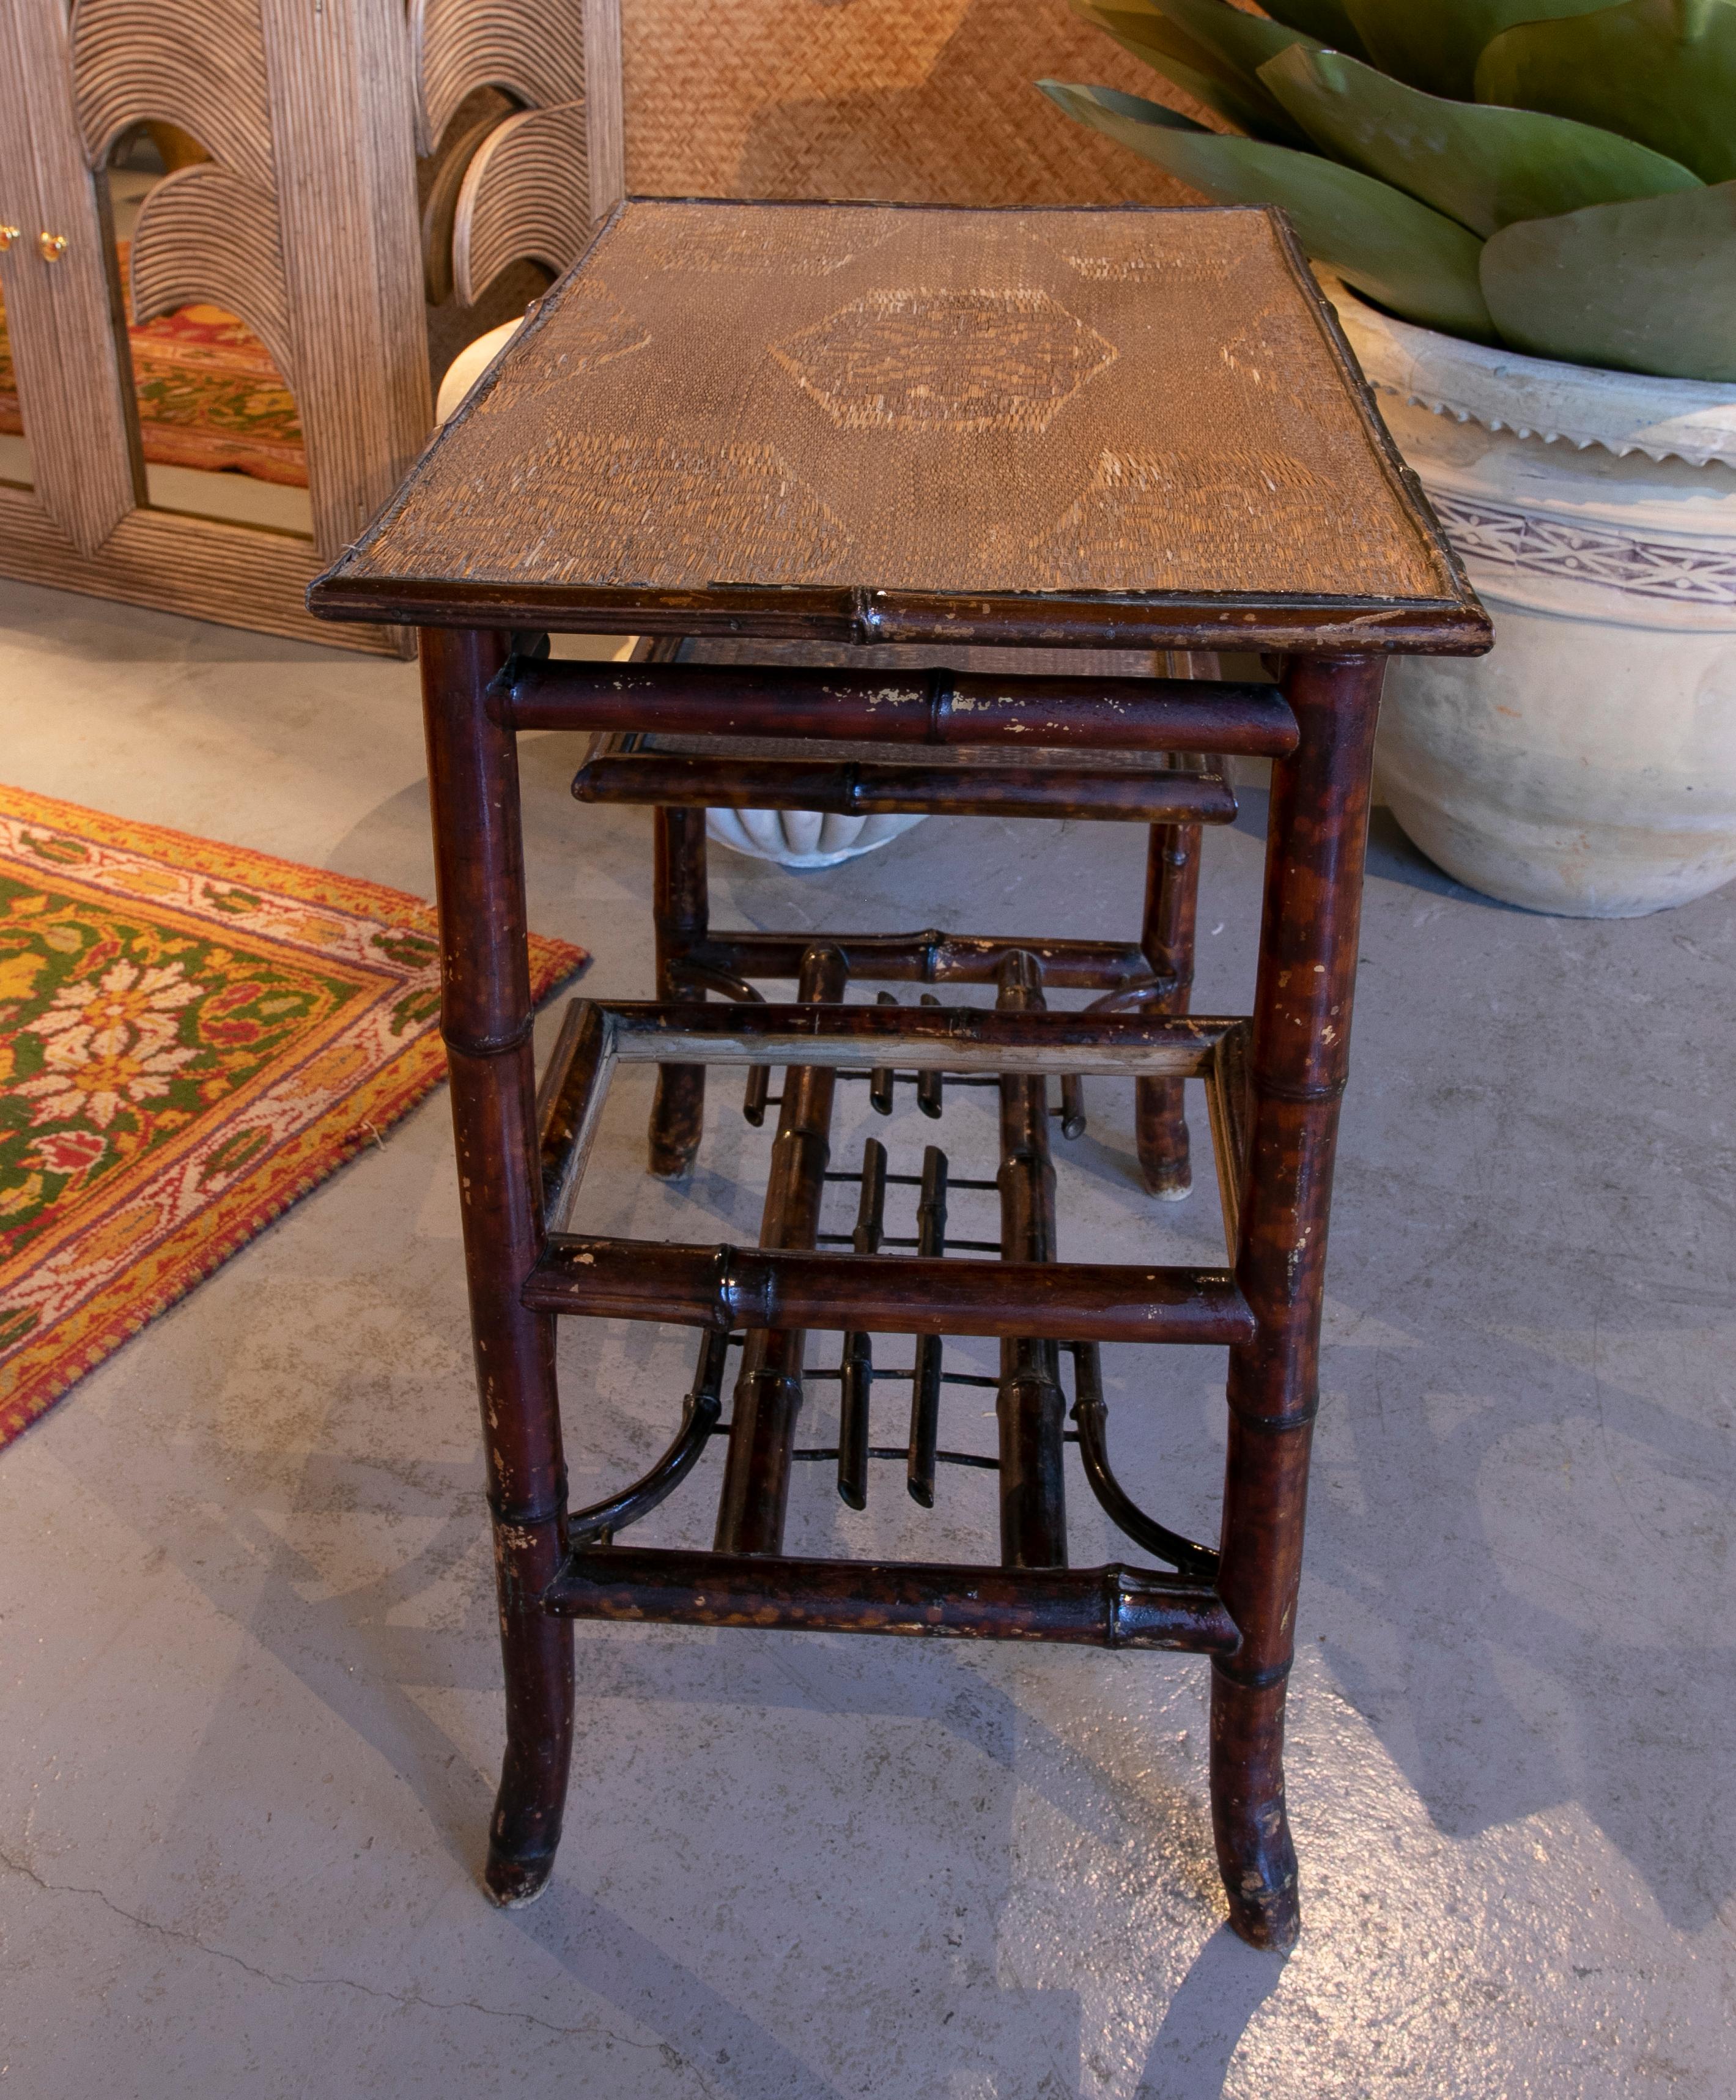 20th Century Chinese Bamboo Sidetable with Wicker Shelves and Top from the 1950ies For Sale